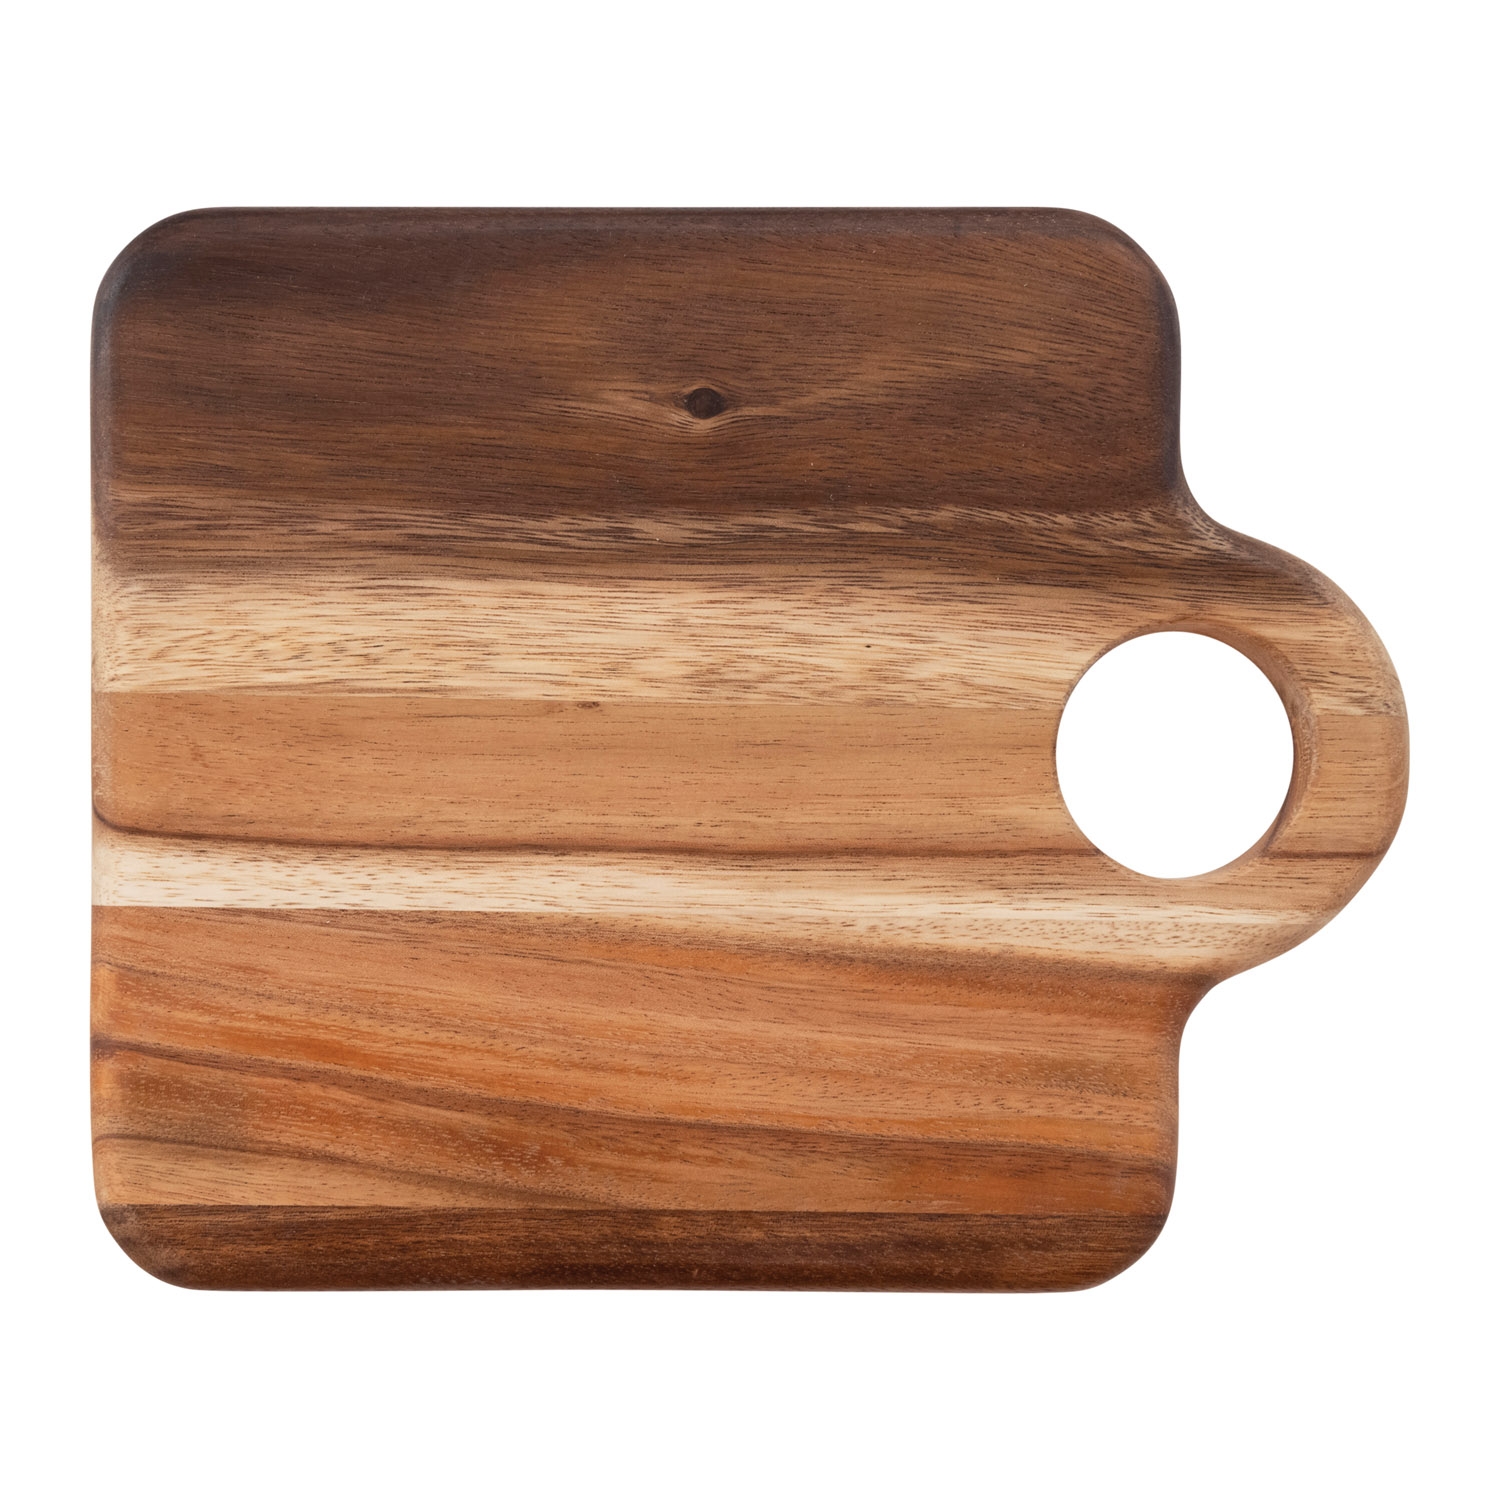 Suar Wood Cheese/Cutting Board with Handle - Image 0